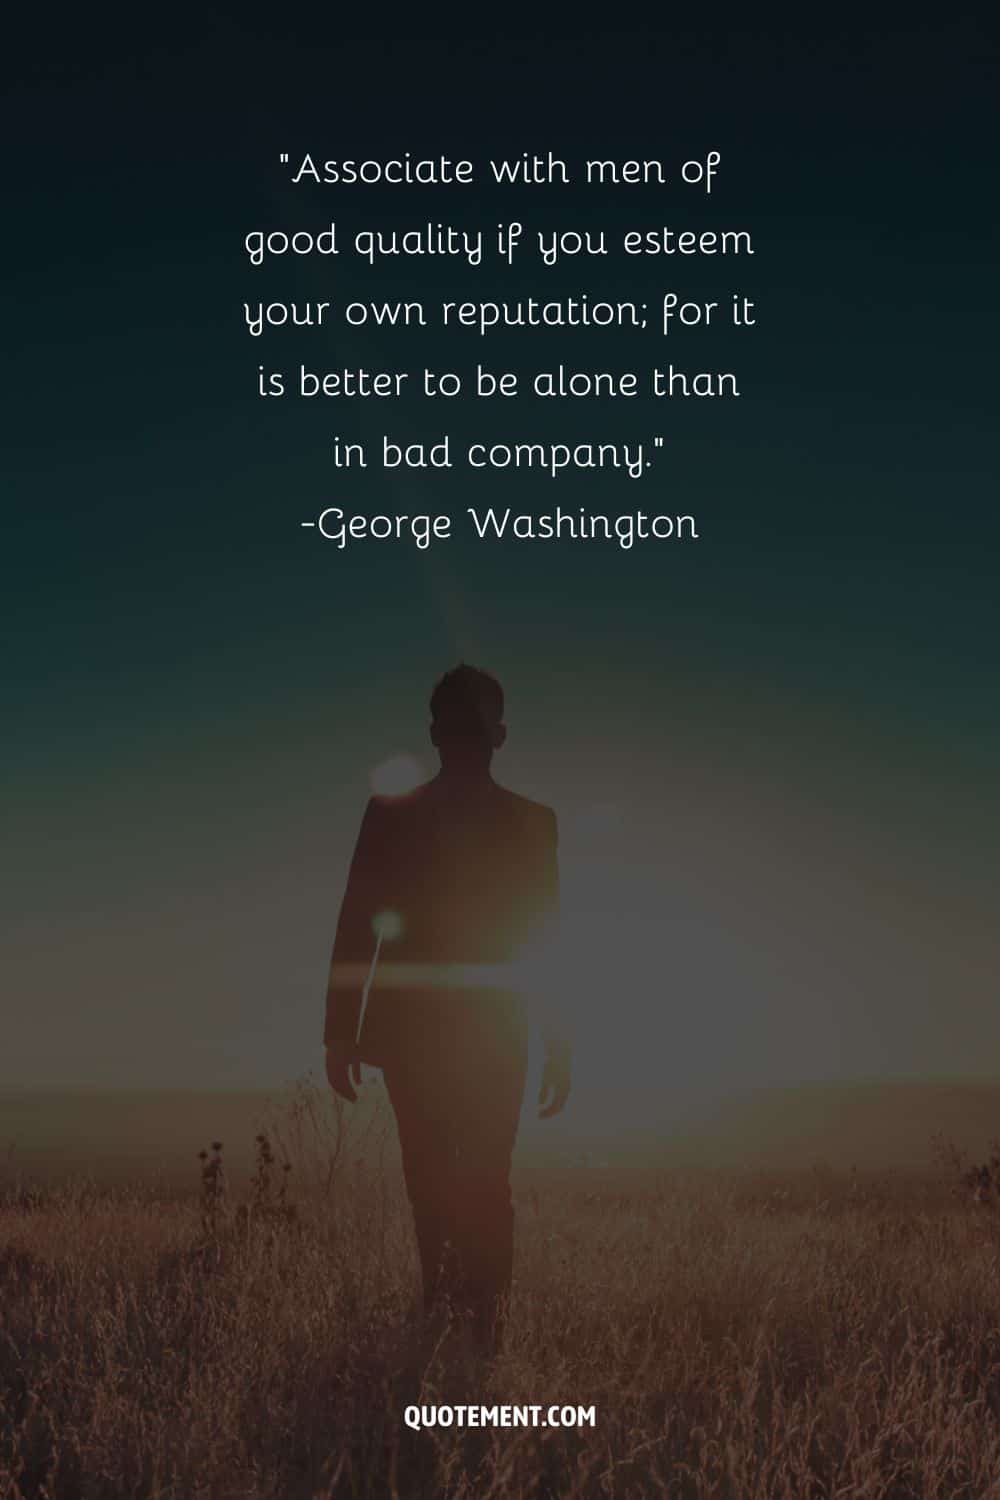 Associate with men of good quality if you esteem your own reputation; for it is better to be alone than in bad company